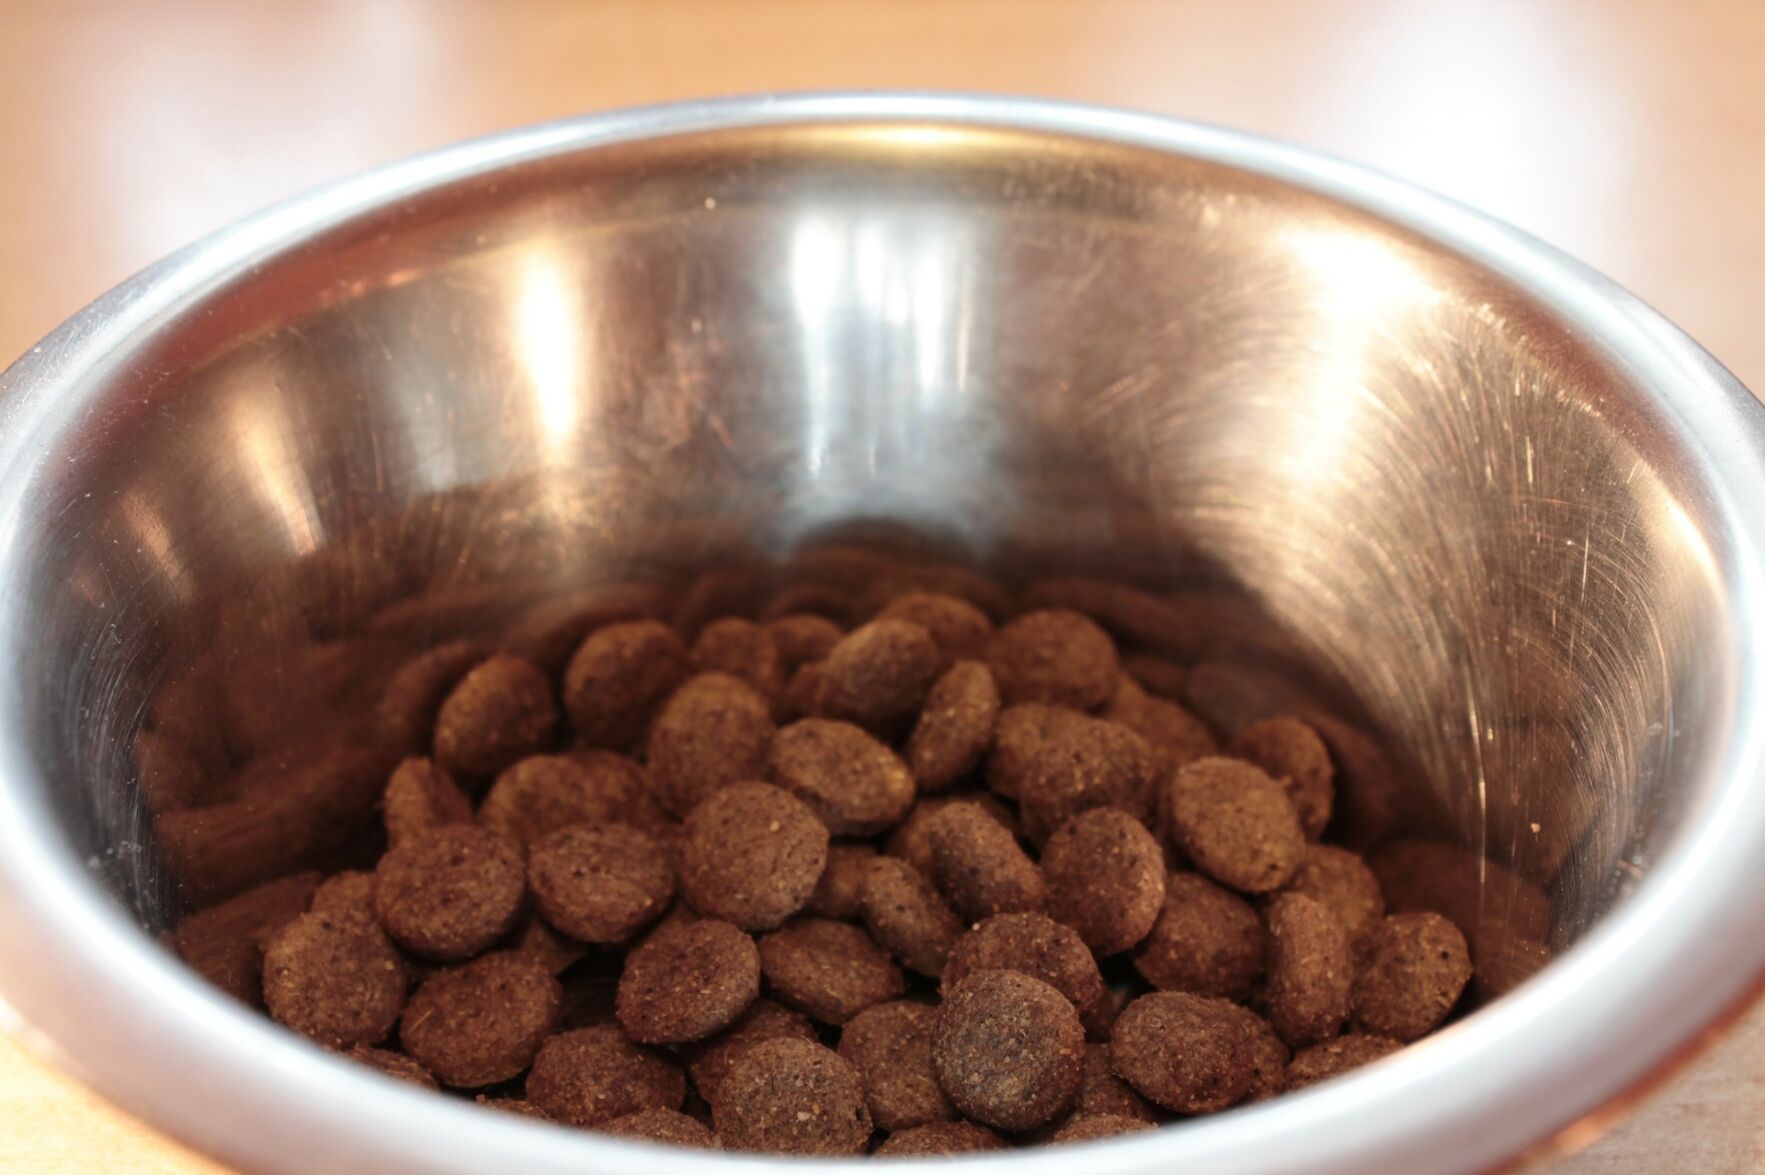 dog foods linked to canine heart disease